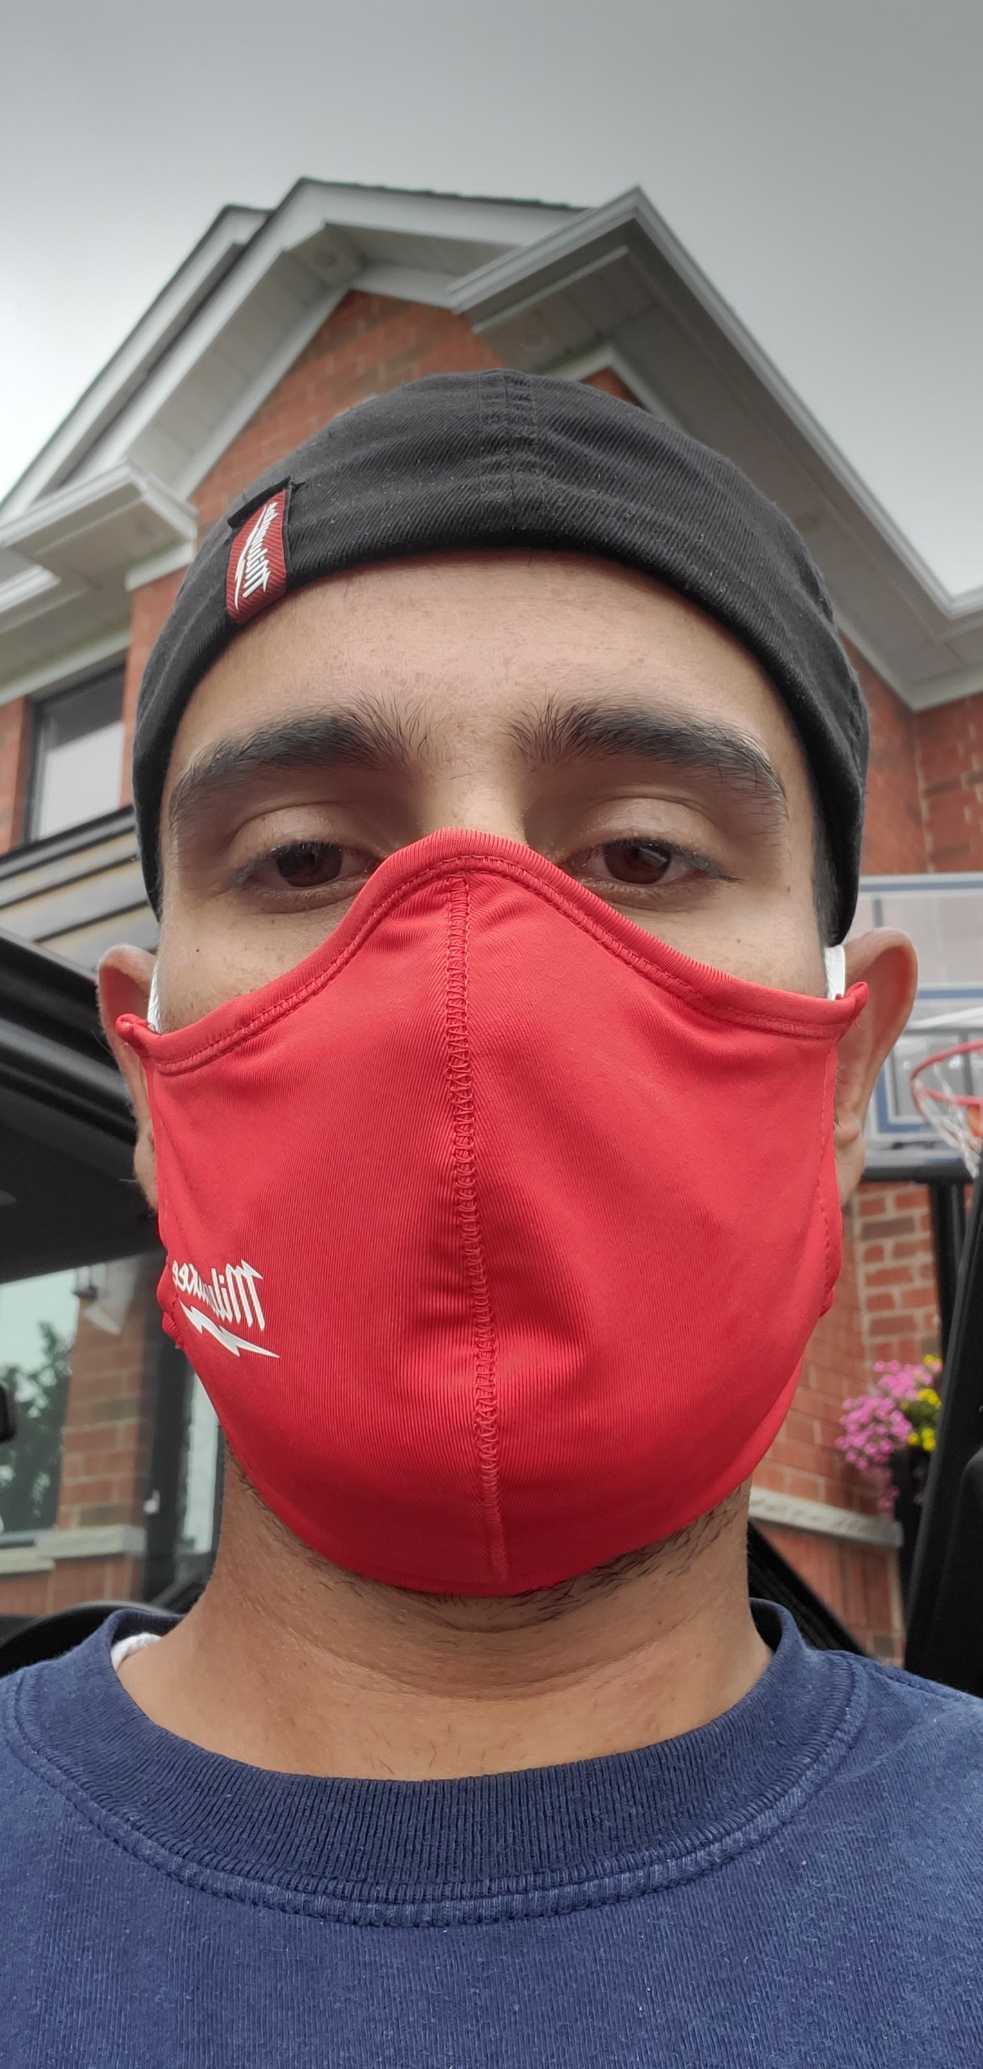 Man looking into camera for a selfie wearing a red mask to protect himself from COVID-19.